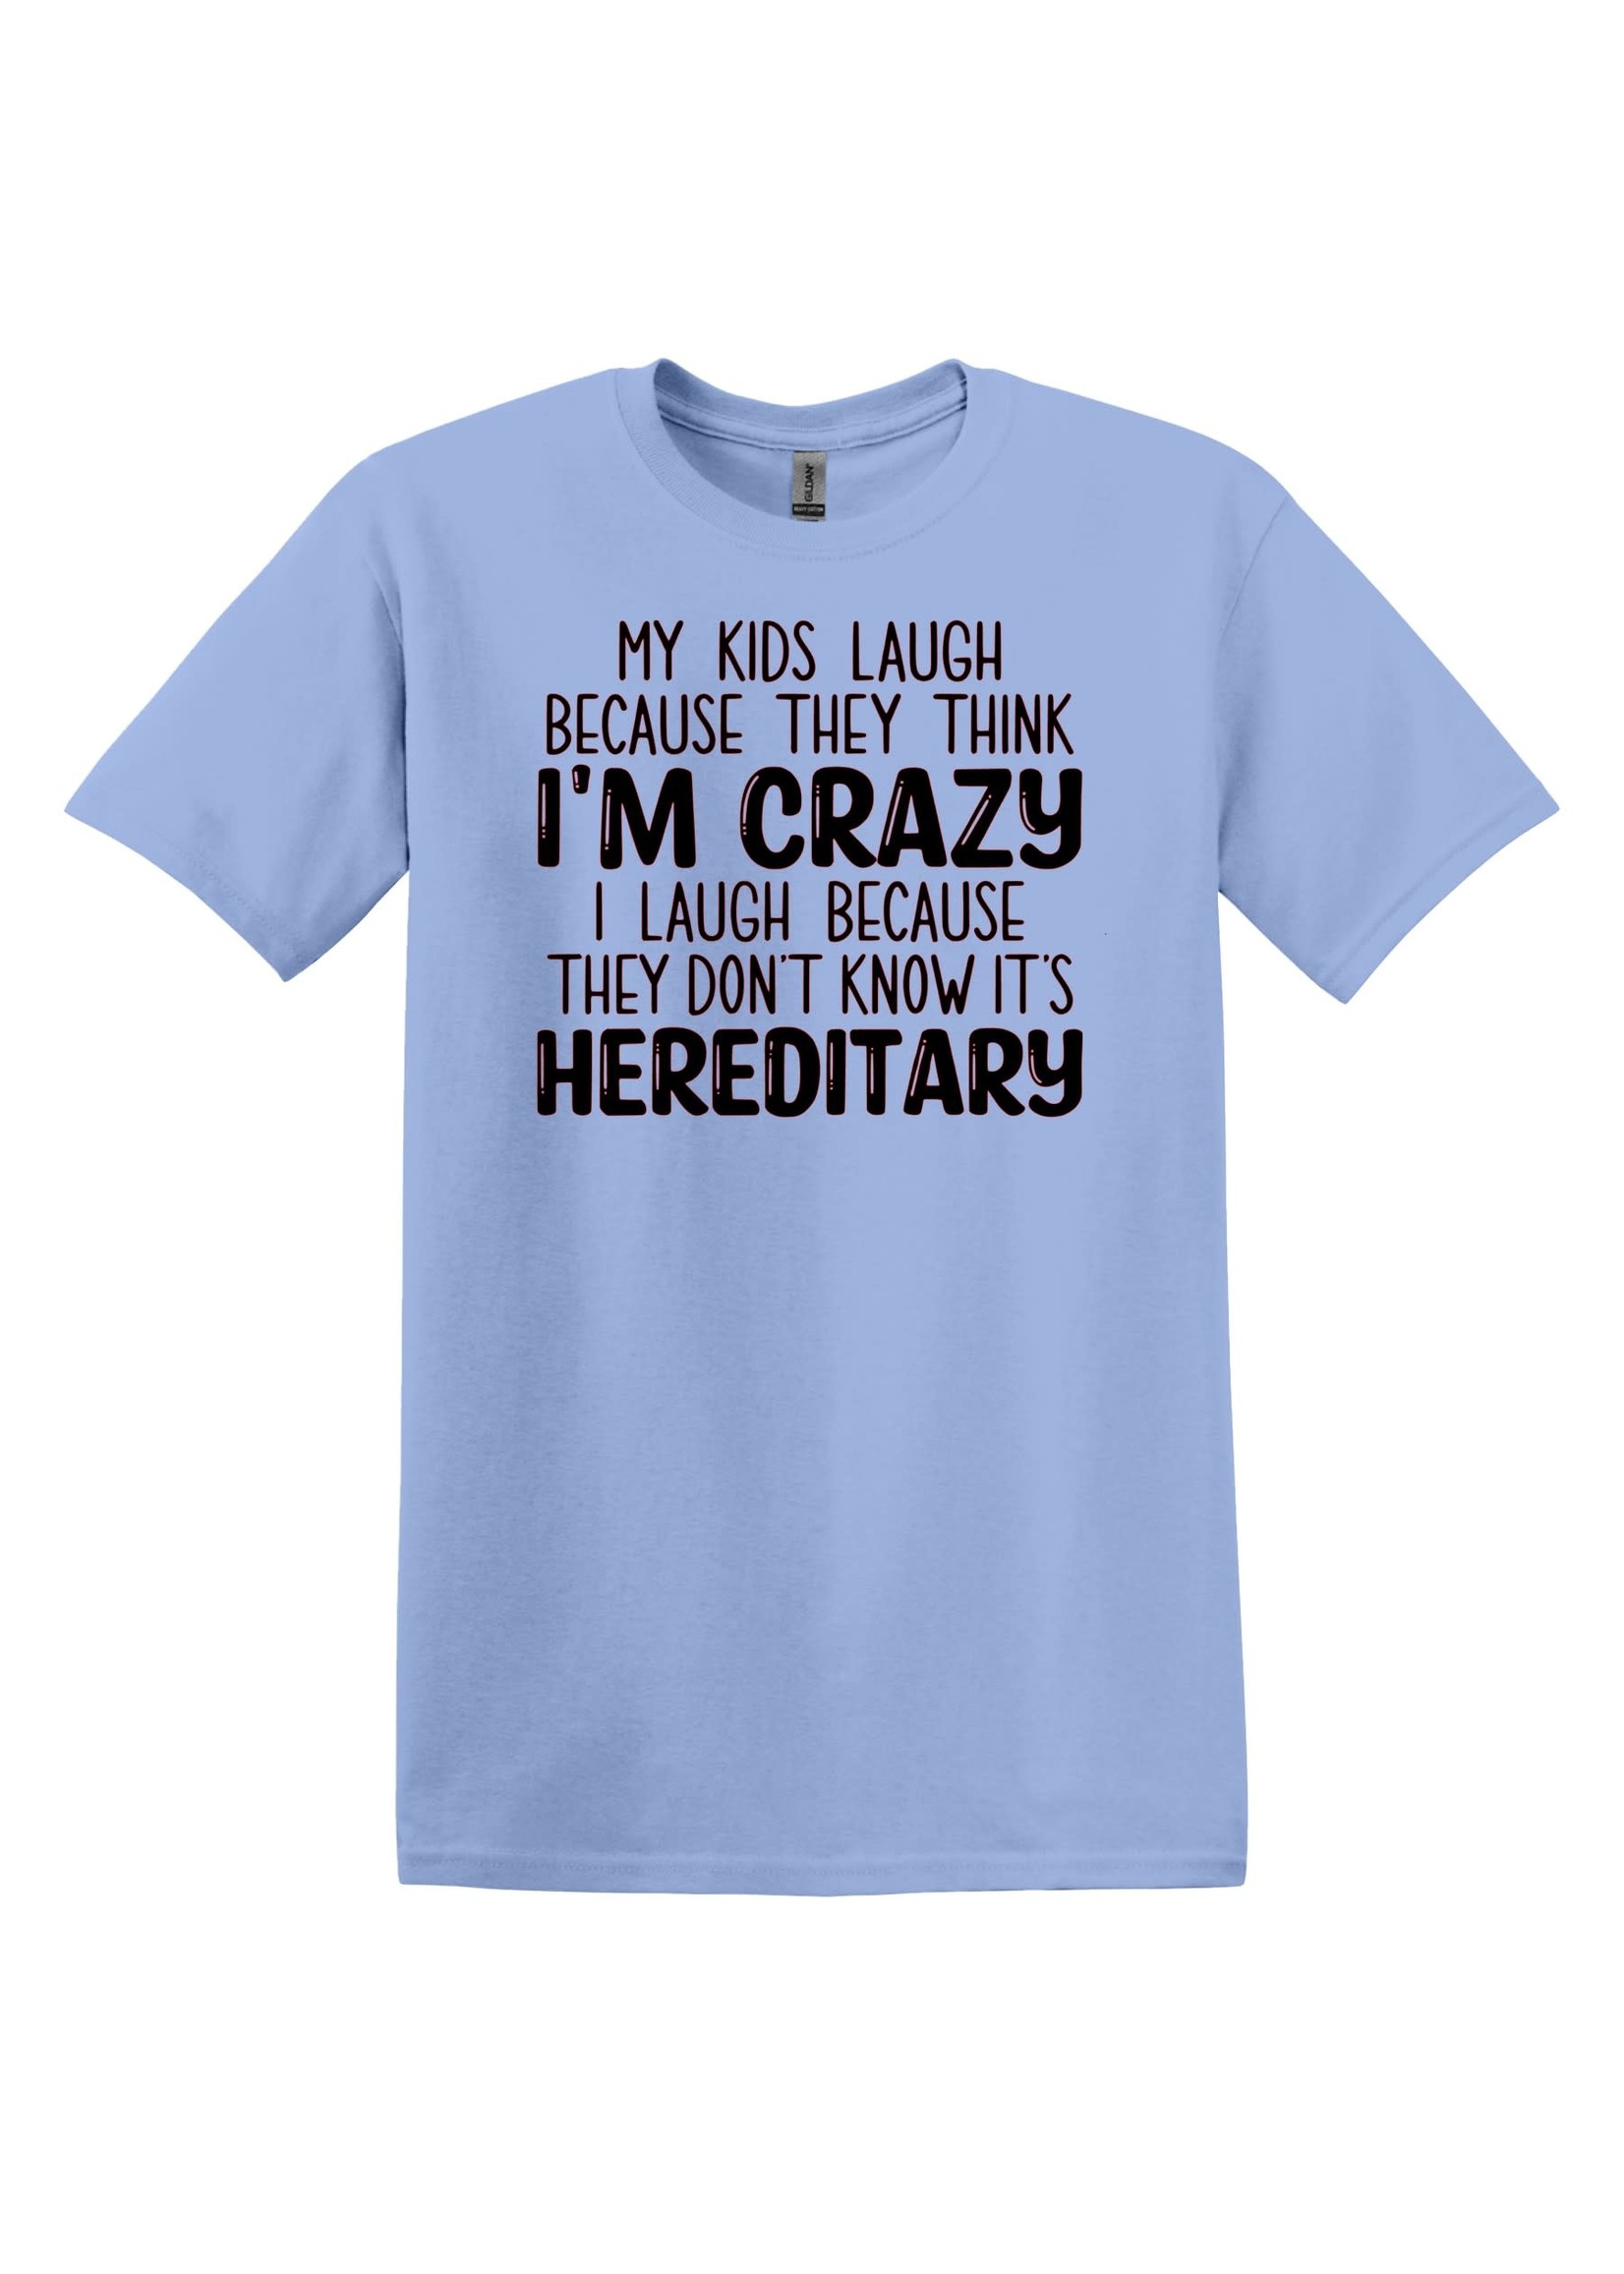 My kids laugh because they think I'm crazy